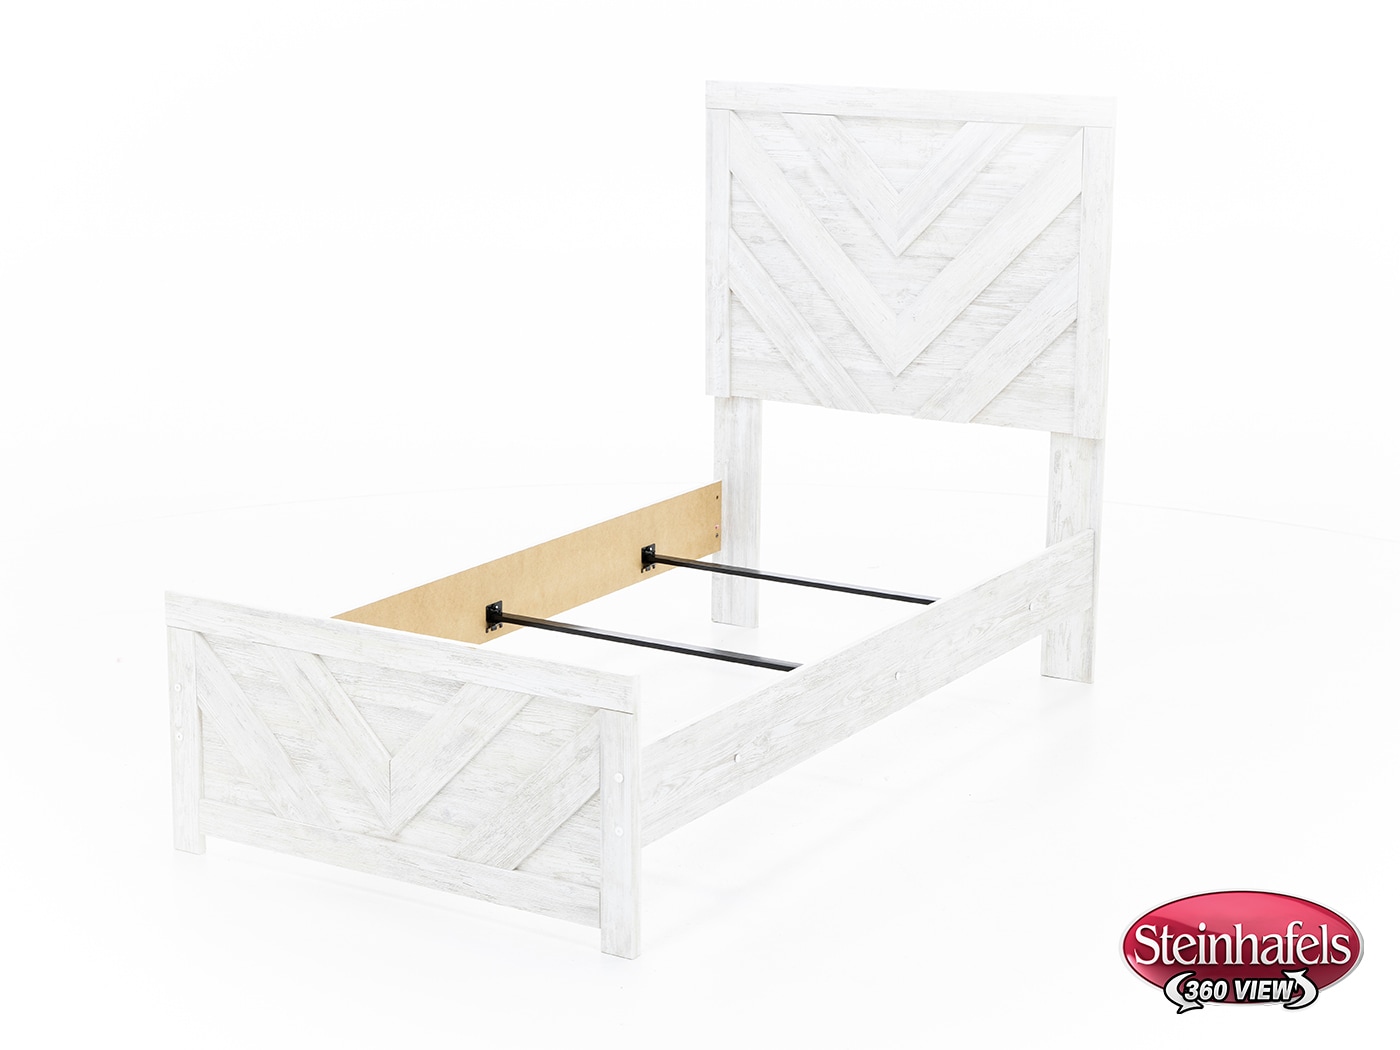 ashy white twin bed package  image tpk  